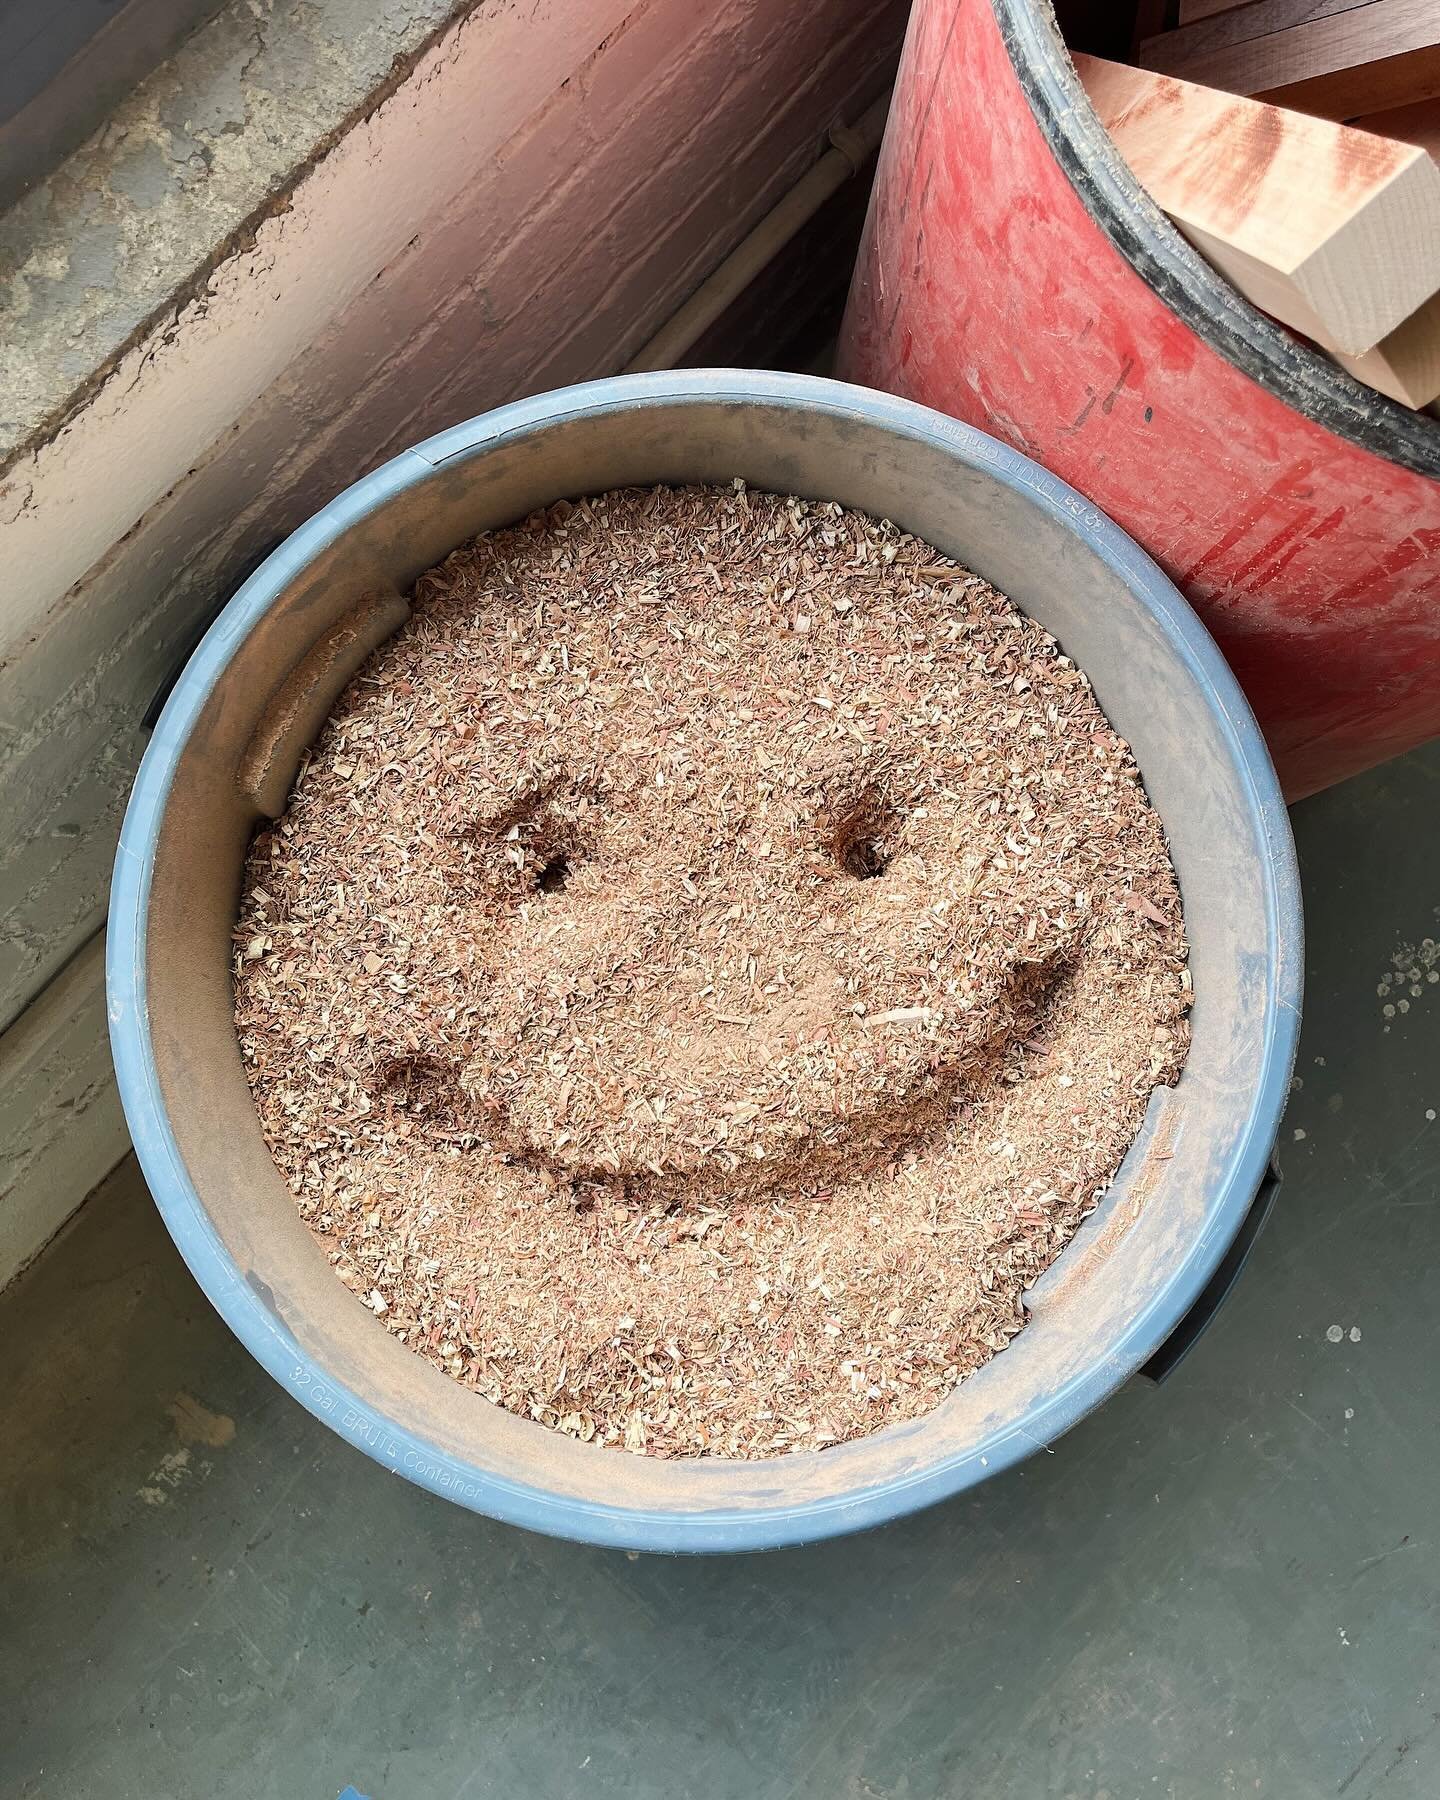 Happy Monday!! Cole left the sweetest smiley in my bin of sawdust and now I&rsquo;m going to avoid emptying it for as long as possible because it makes me so happy @colemccloskey 

.
.
.
.
.
.
.
.
.
#monday #woodshop #sawdust #wip #woodworking #woodw